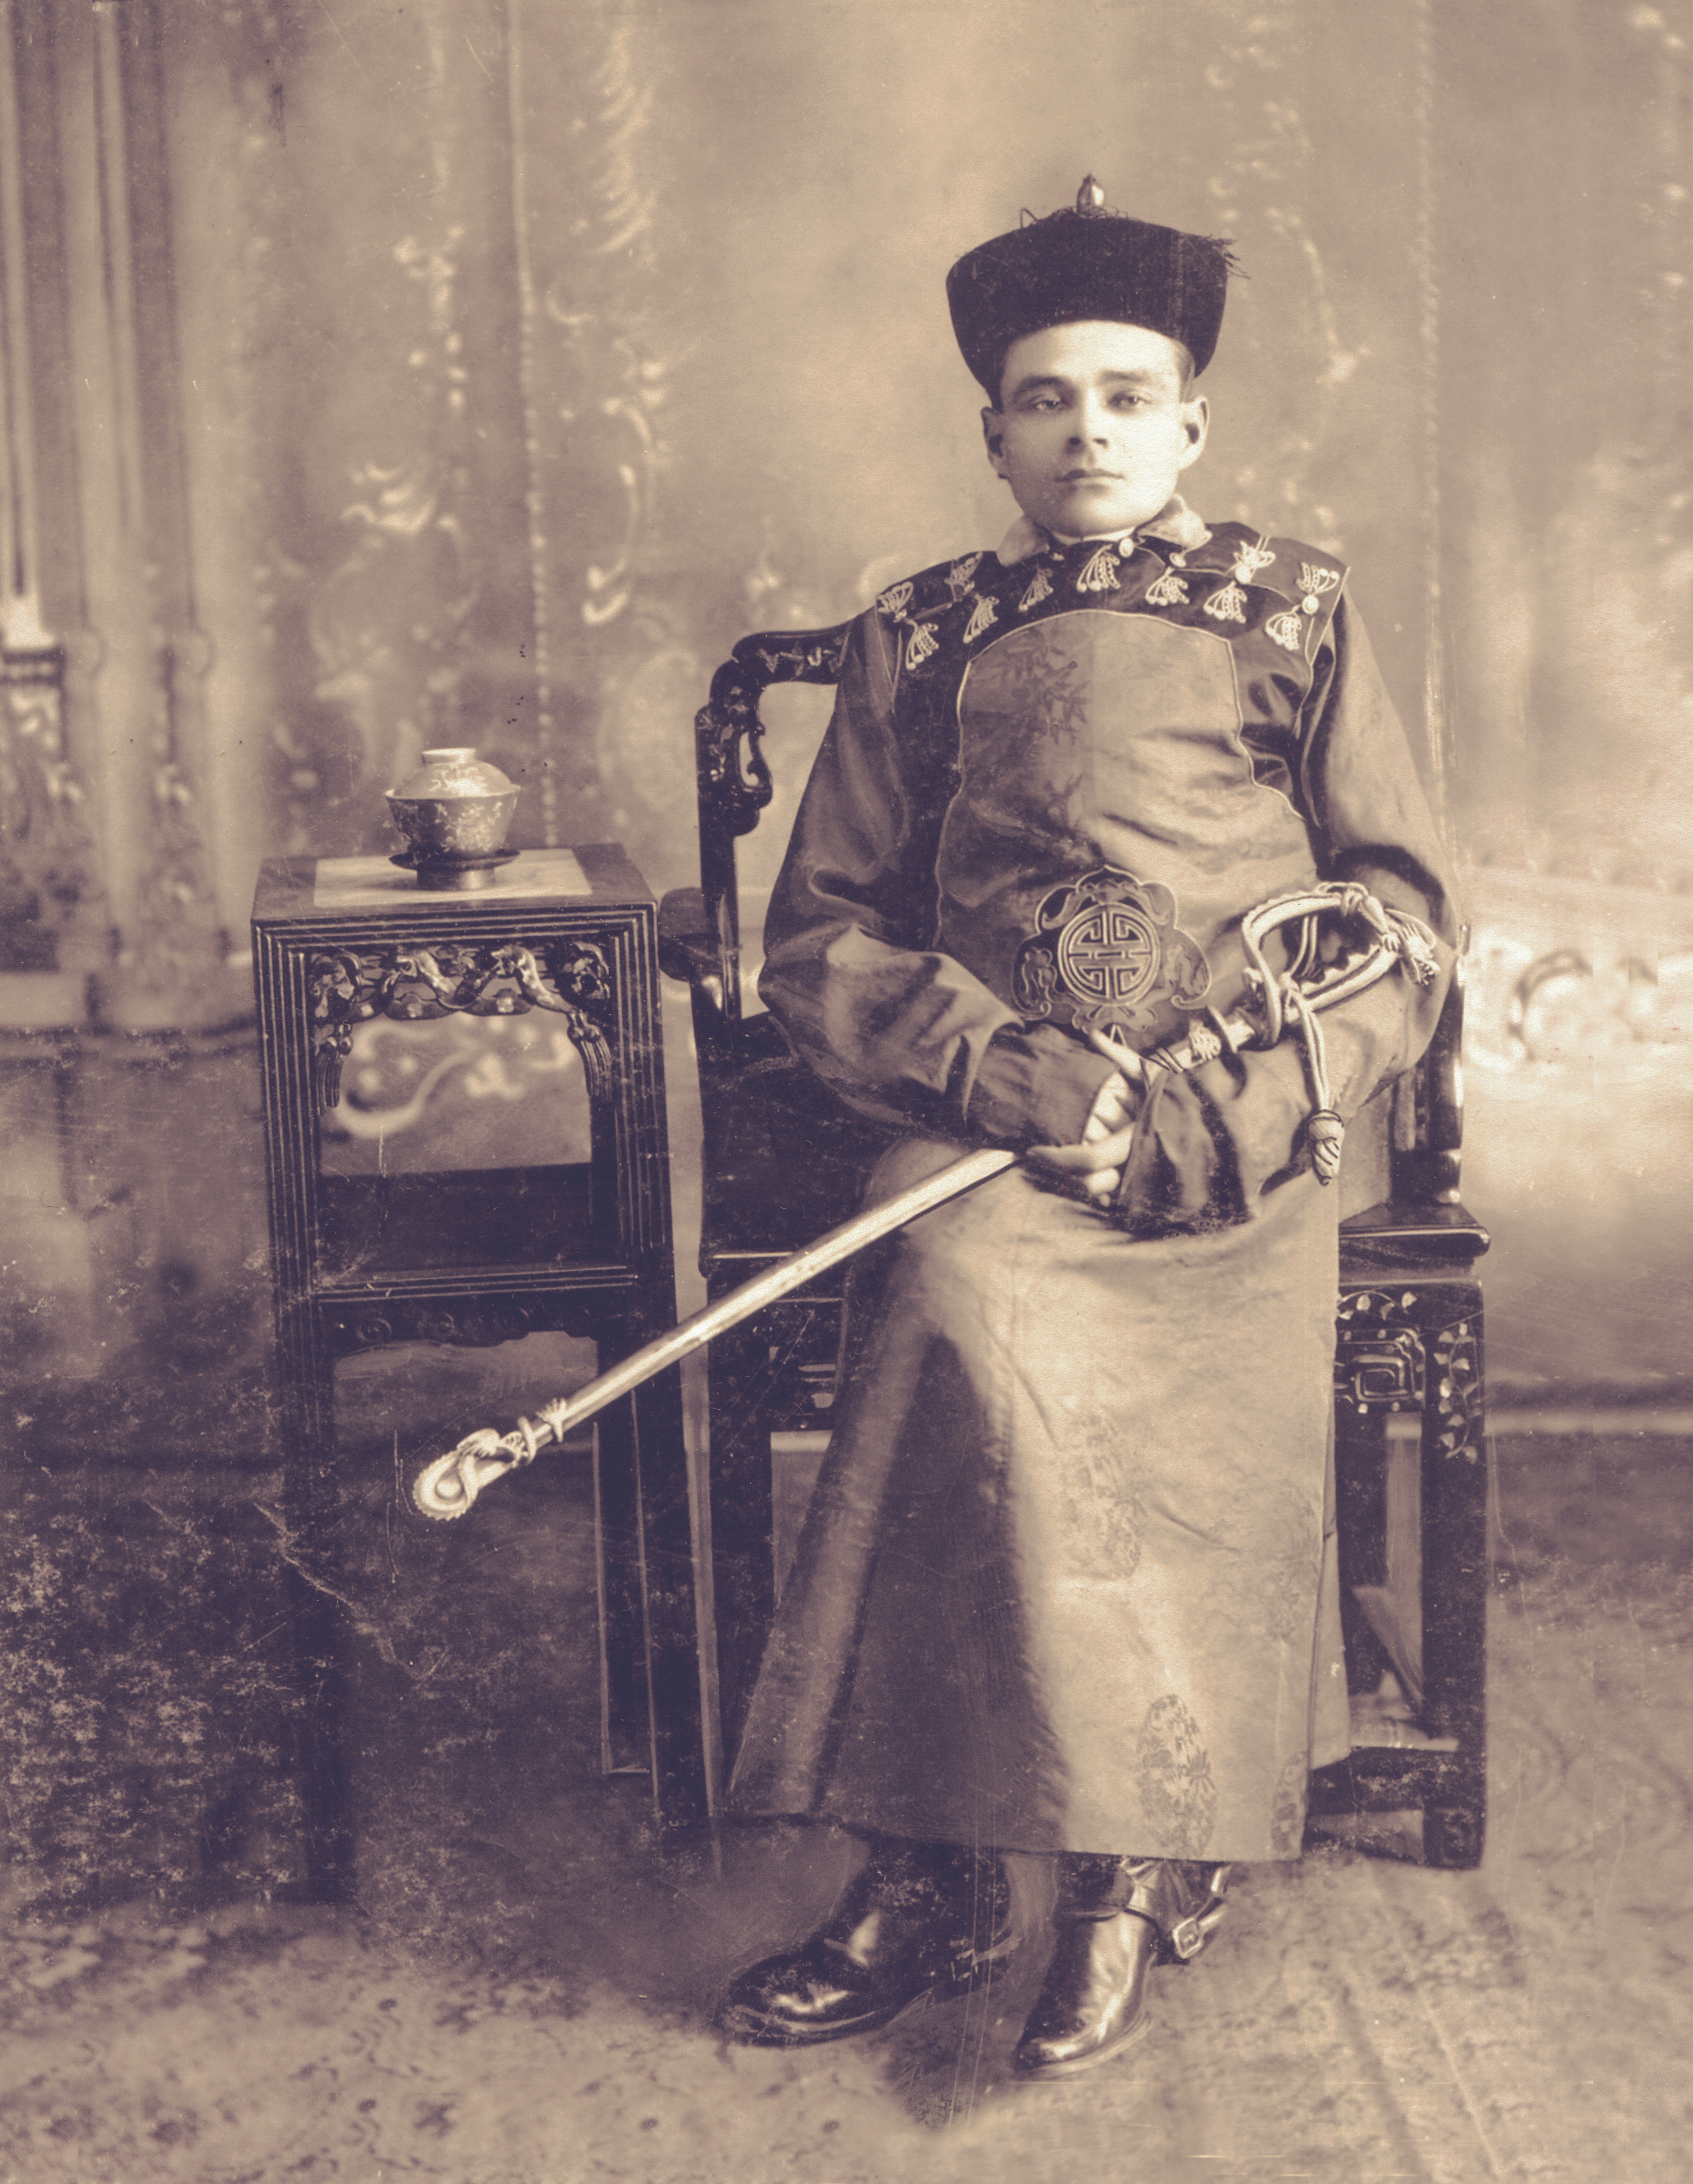 Sitting for the same photographer in 1904, Lea donned Chinese attire—a ceremonial robe and court official’s hat—and cradled the dragon-hilted sword he claimed to have taken from an enemy. (Lawrence M. Kaplan Files (Homer Lea Research Center, homerlea.org)